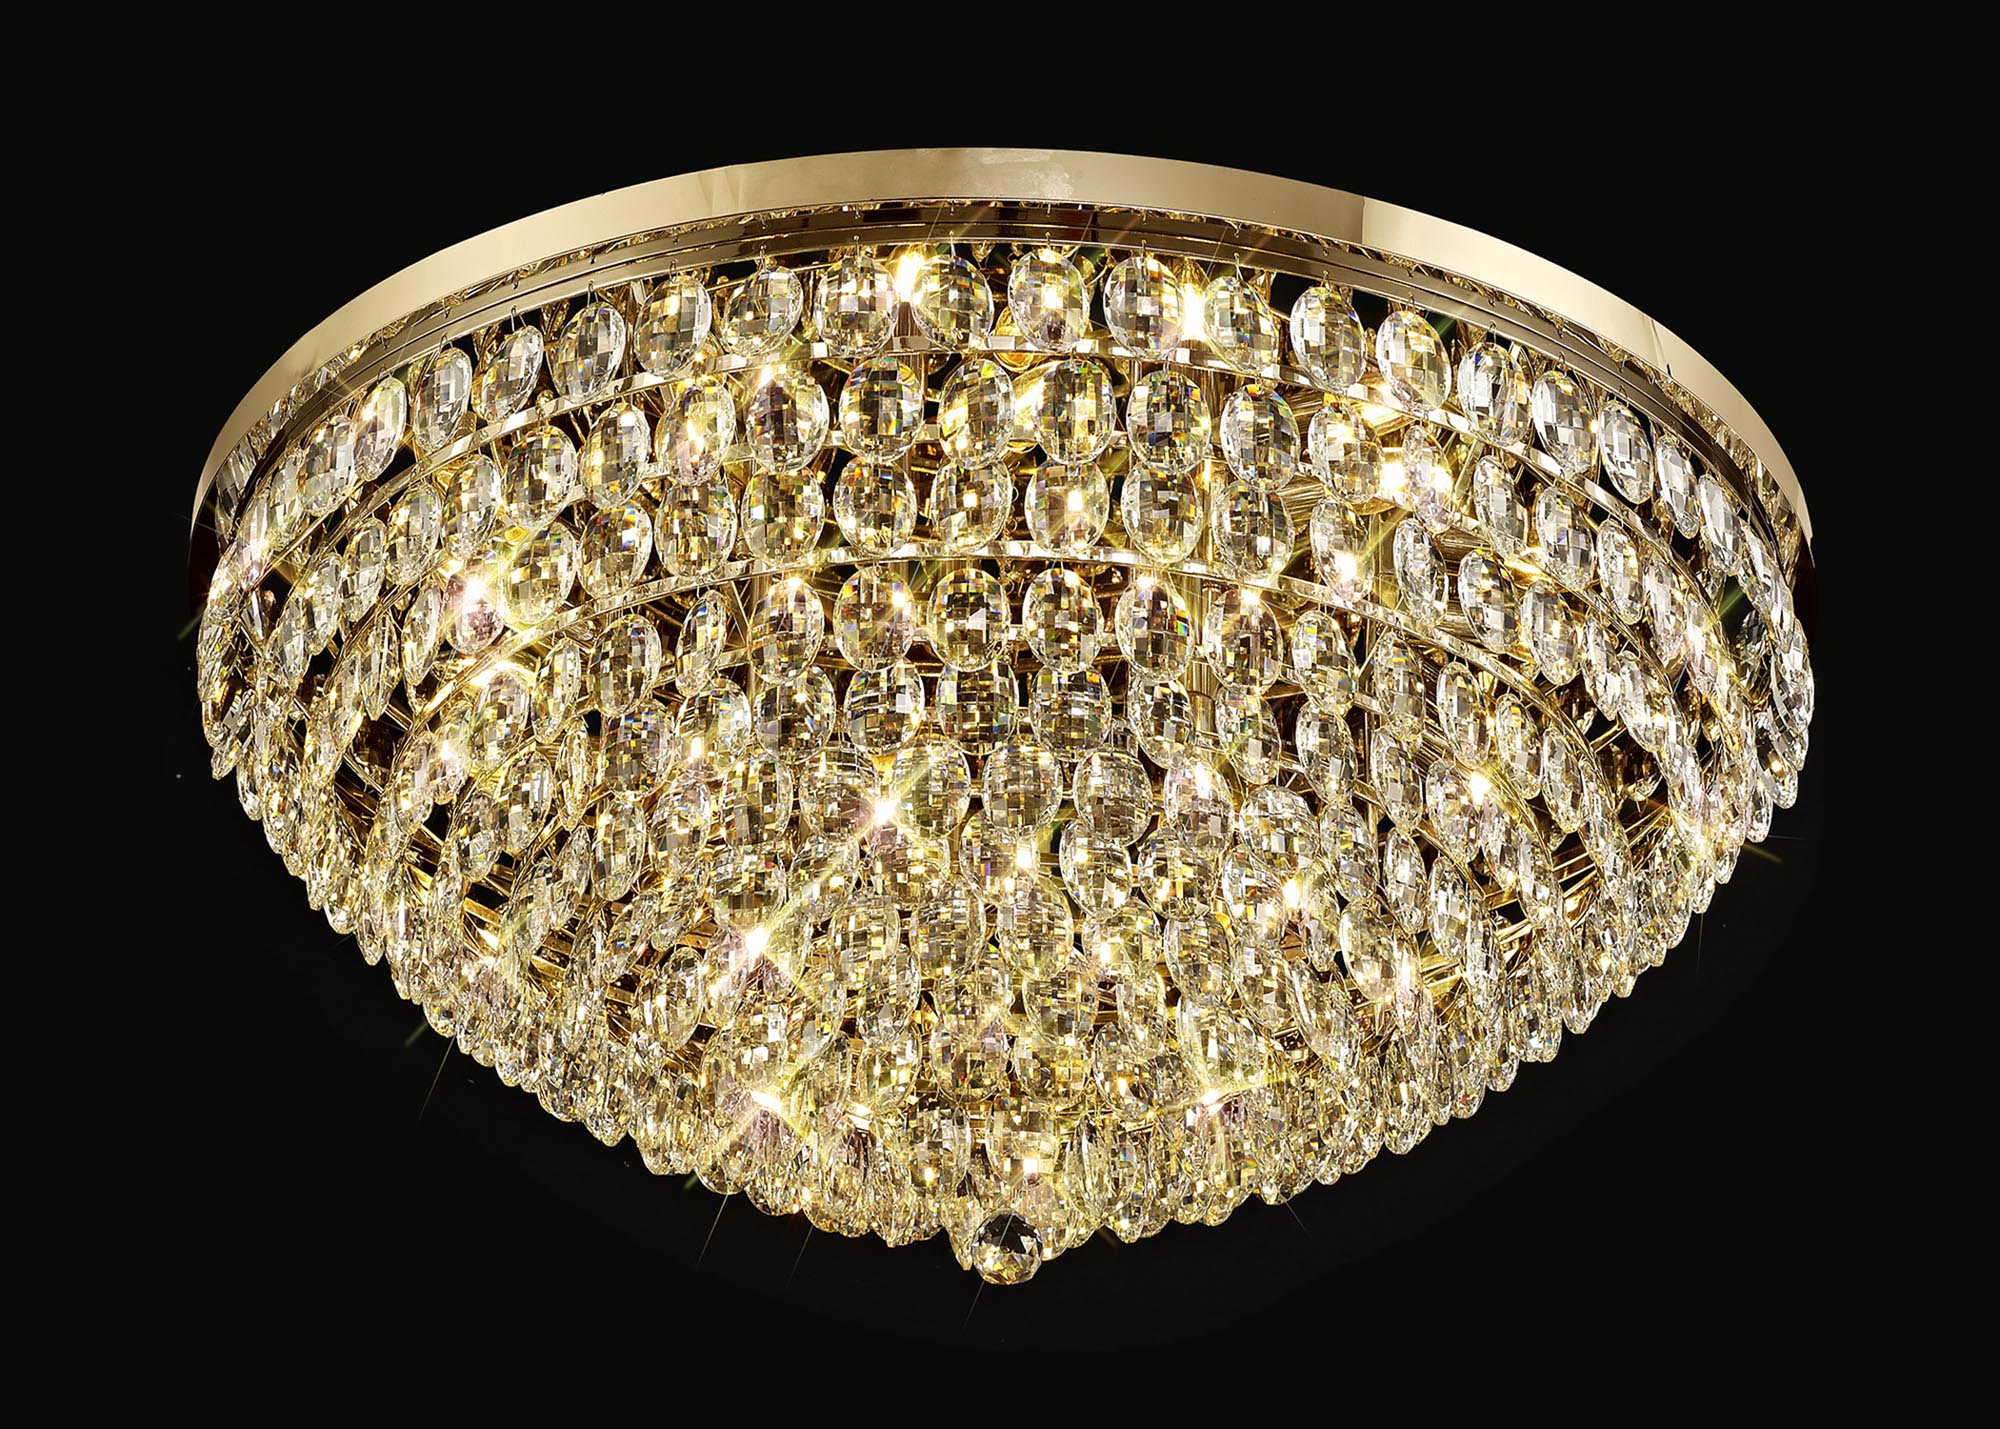 IL32819  Coniston Ceiling 15 Light (35.4kg) French Gold